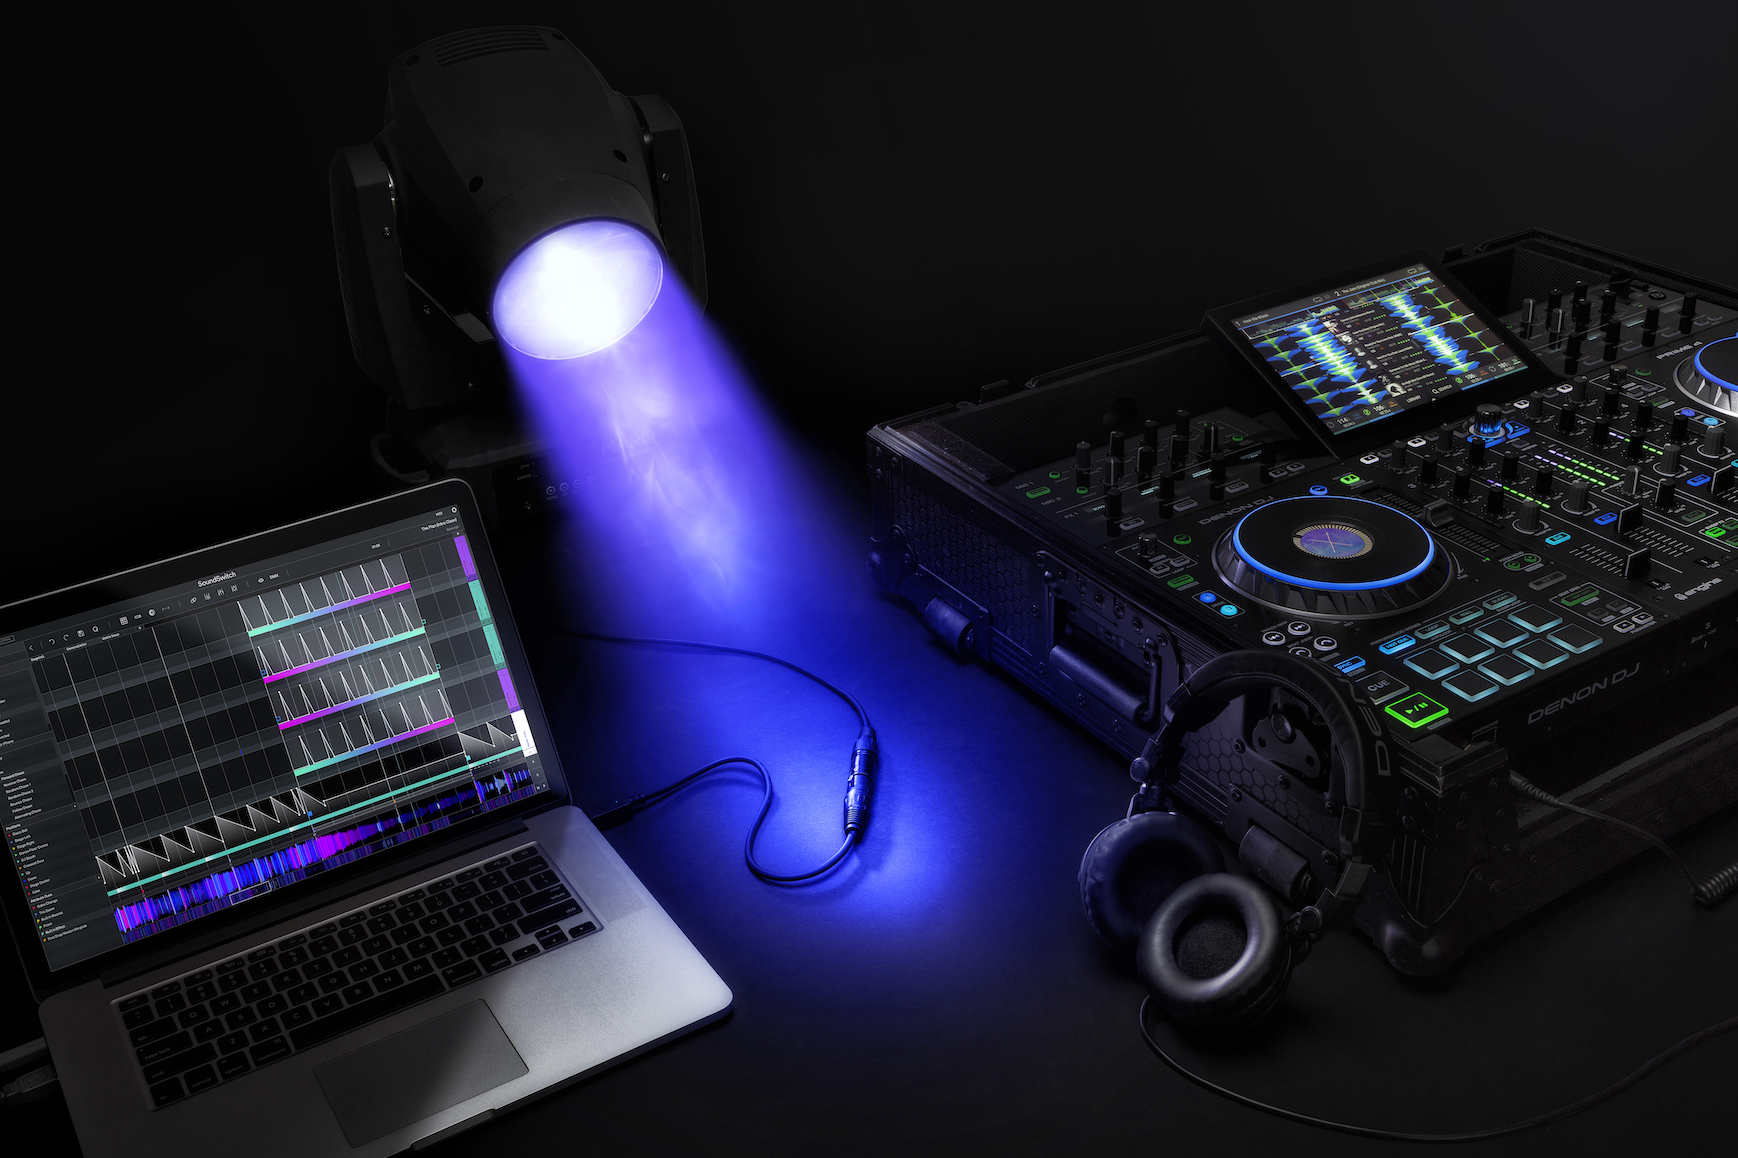 SoundSwitch Micro USB to DMX Interface with Lights a laptop and DJ hardware from Denon DJ the Prime 2